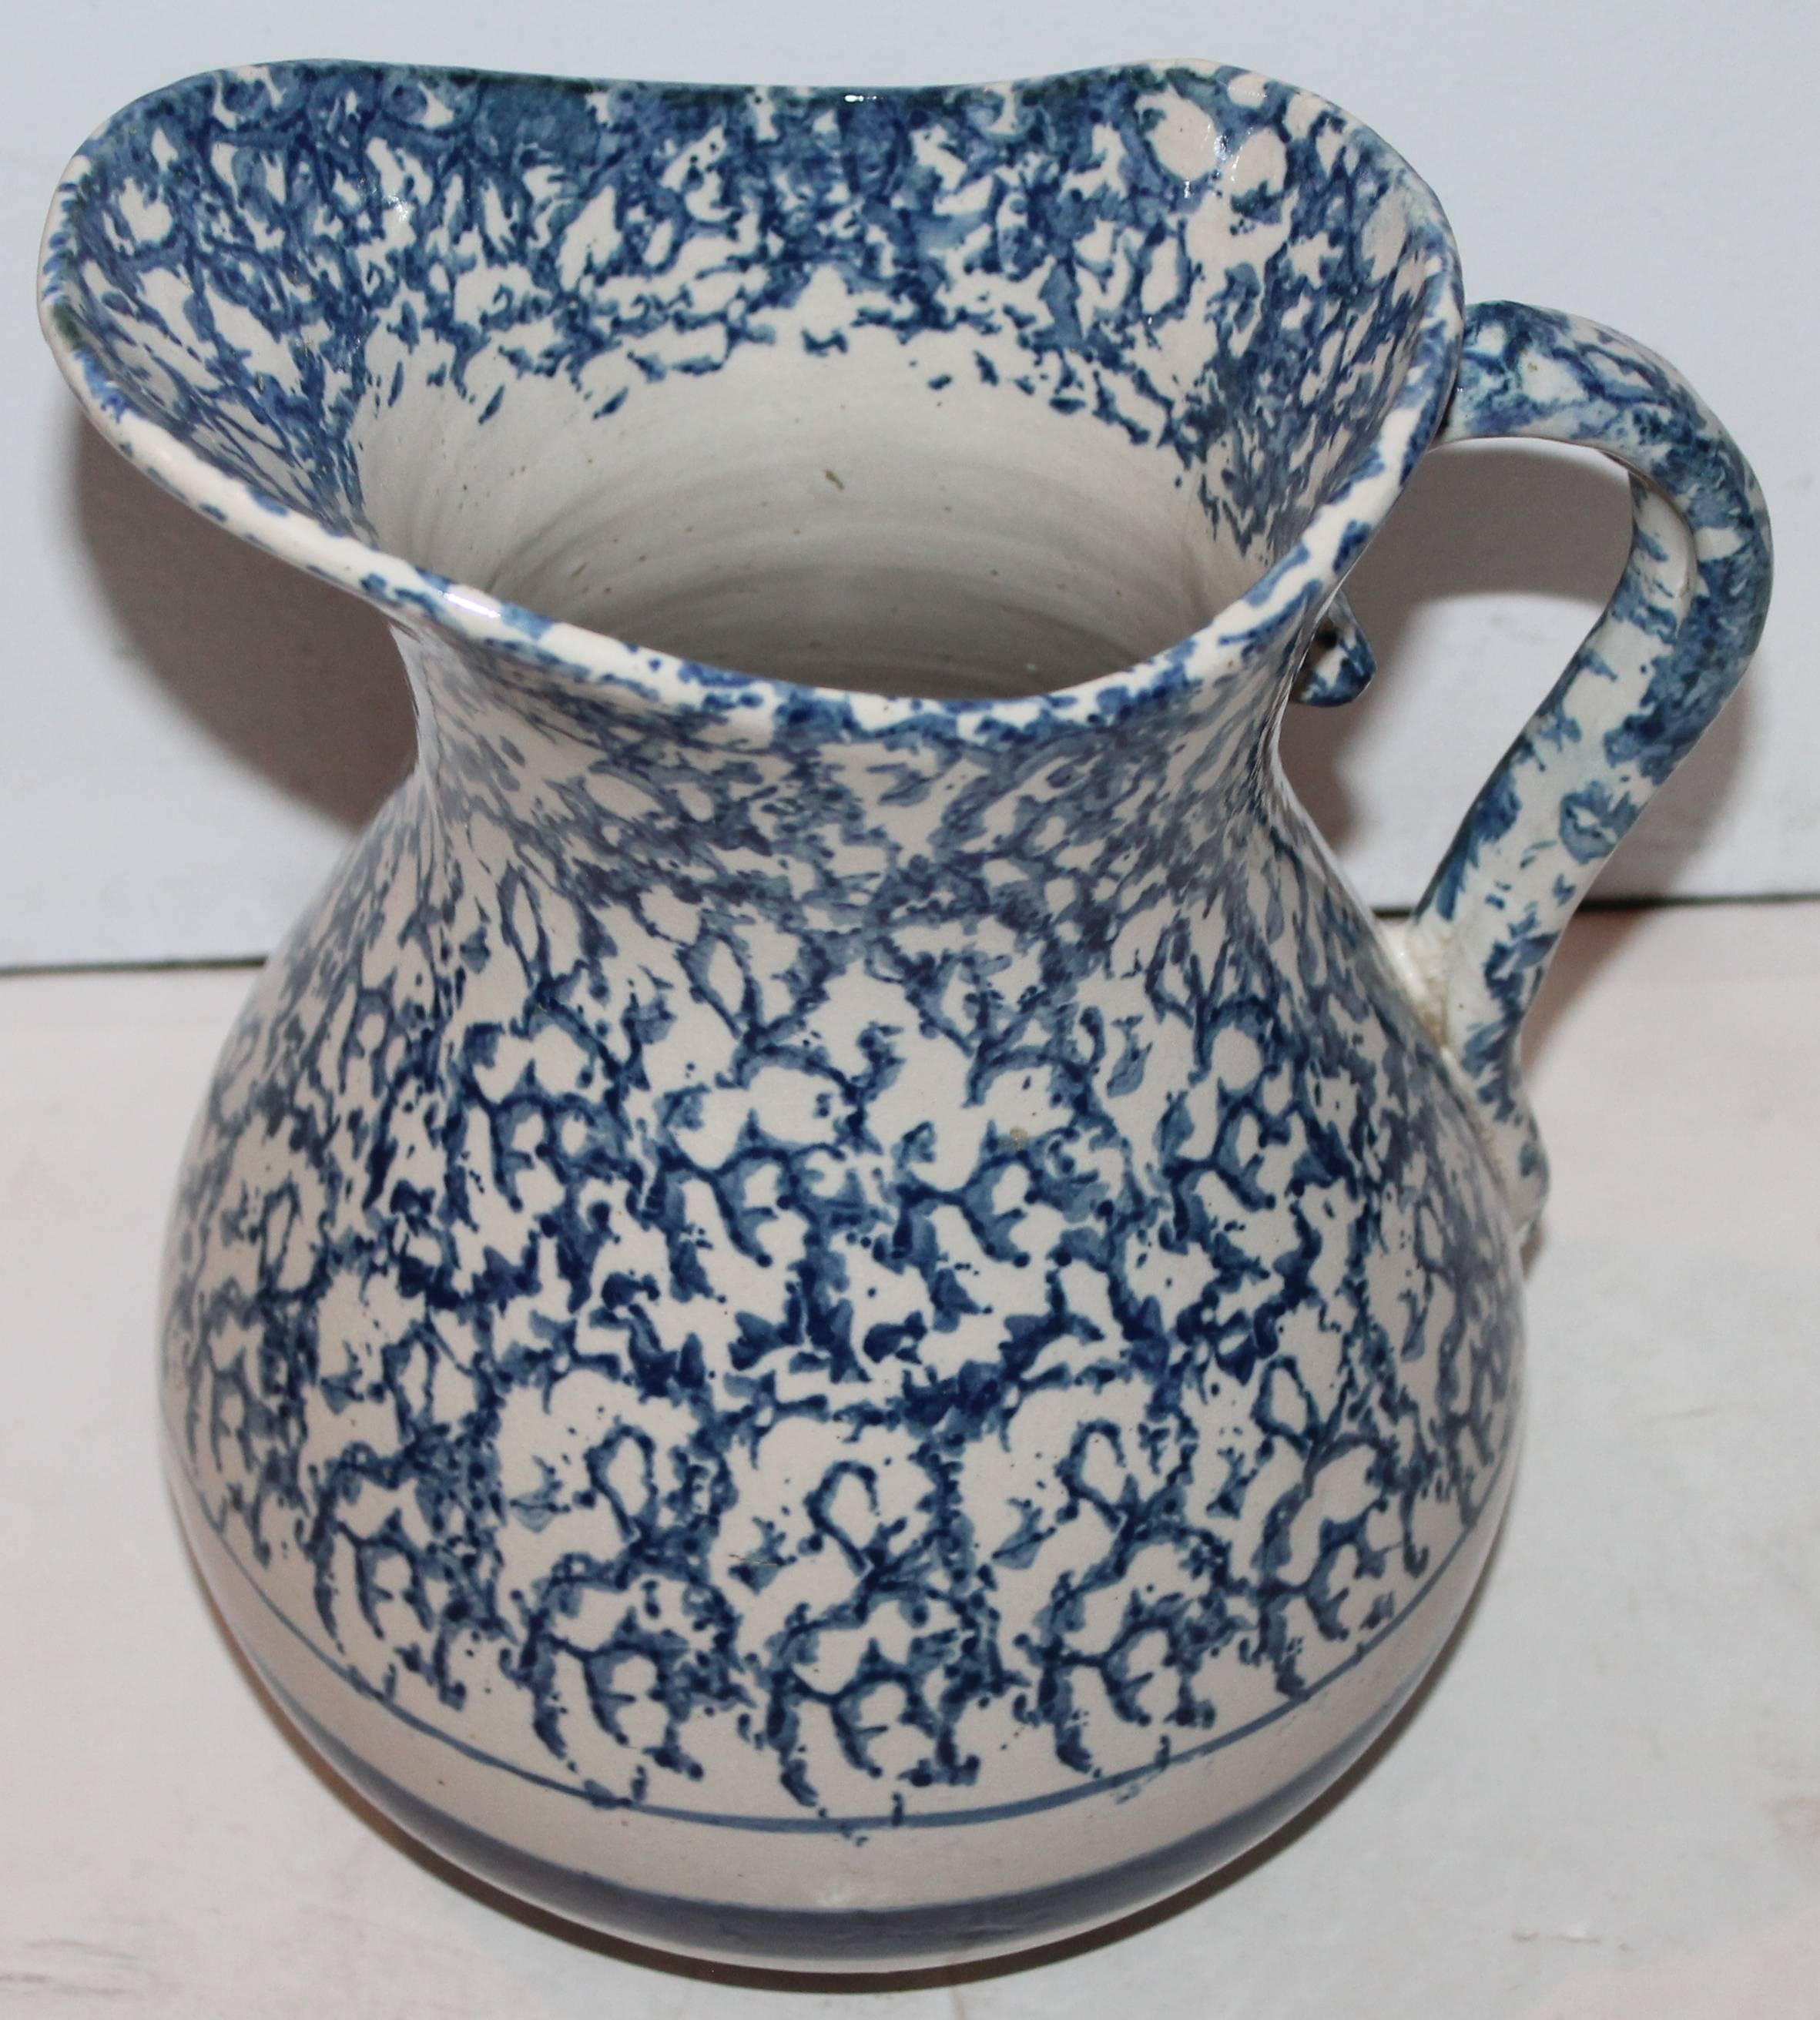 This fantastic very large spongeware pitcher is in mint condition and very rare to find. Most likely from a wash bowl and pitcher bath set. Great for flowers on a table.